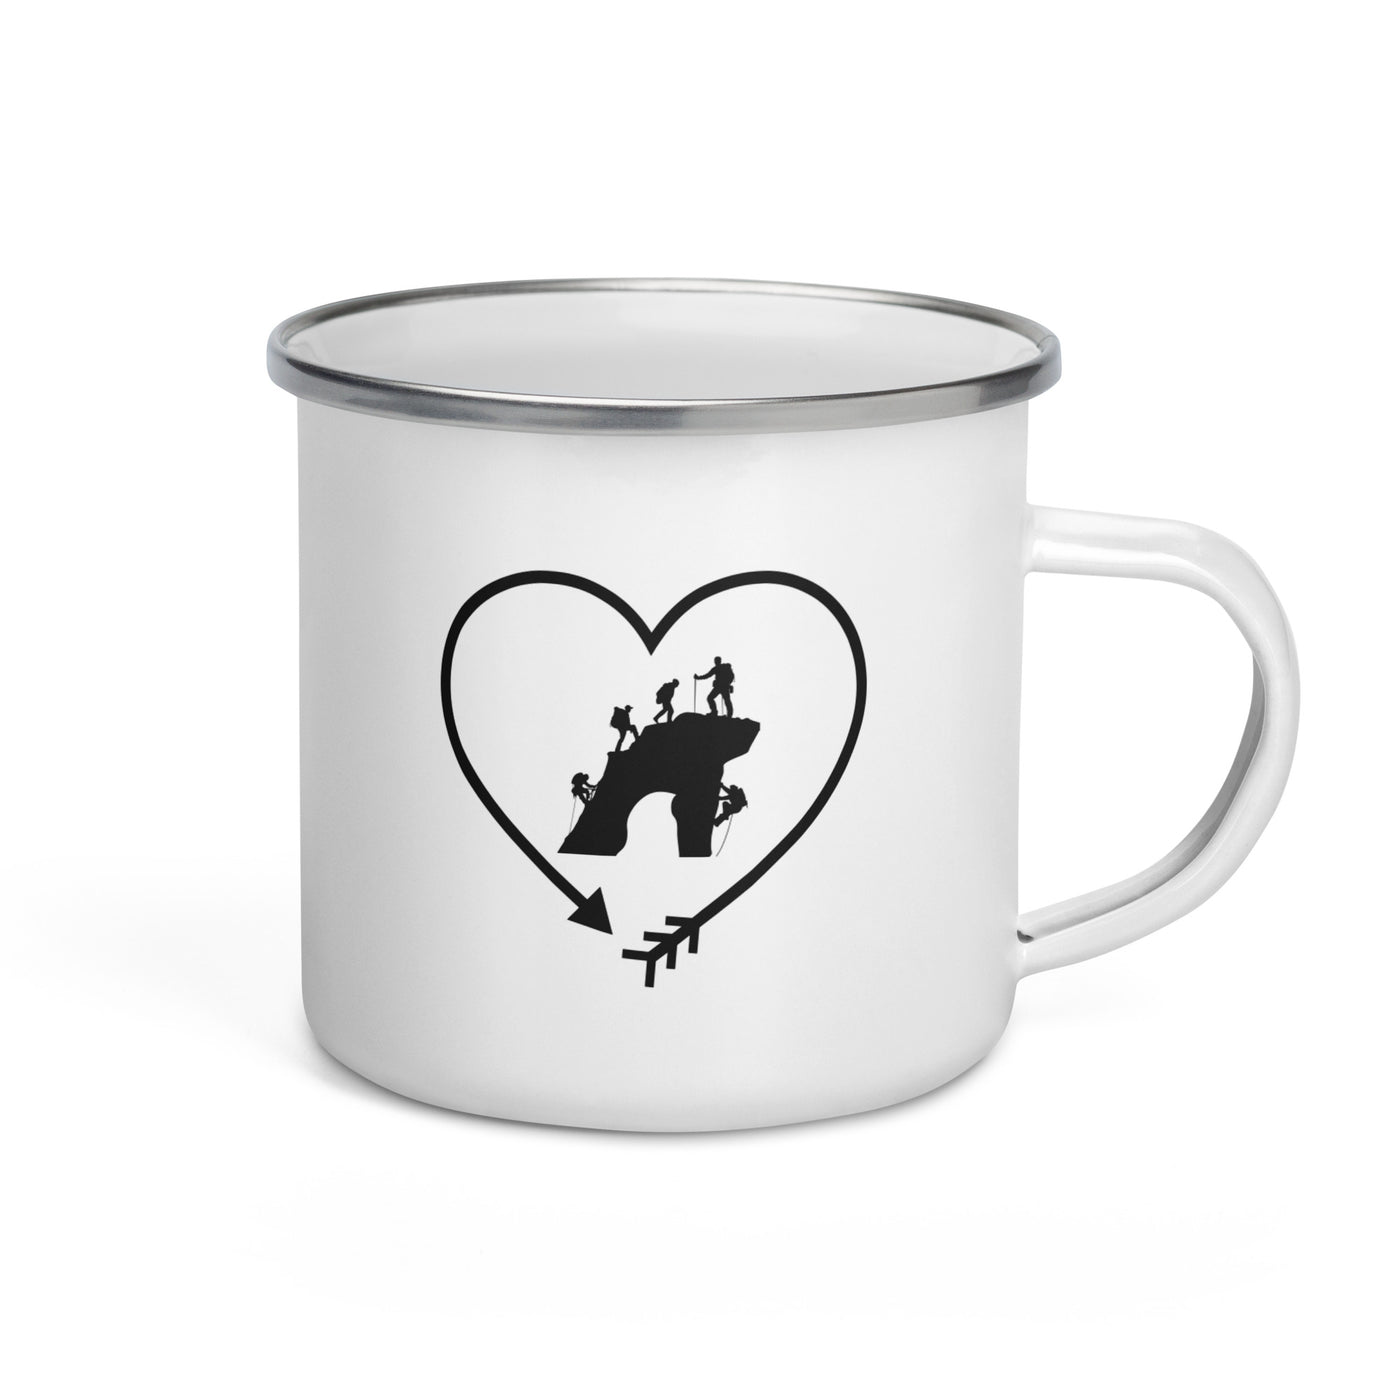 Arrow In Heartshape And Climbing - Emaille Tasse klettern Default Title